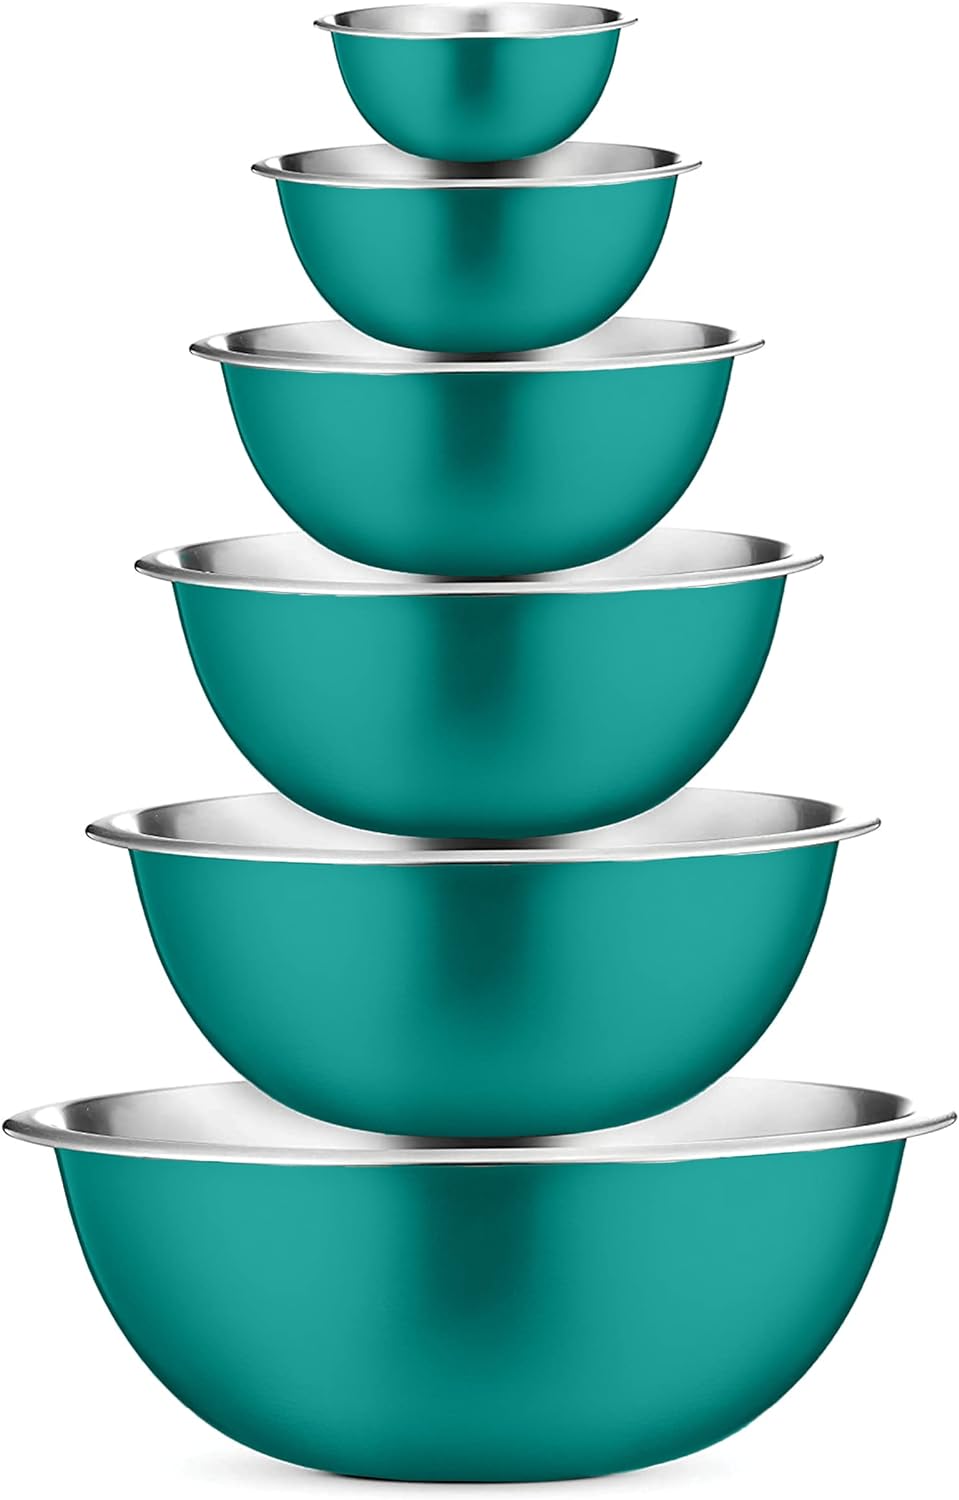 FineDine Stainless Steel Dishware Bowls - Easy To Clean, Nesting Bowls for Space Saving Storage, Great for Cooking, Baking, Prepping, 8 Quarts